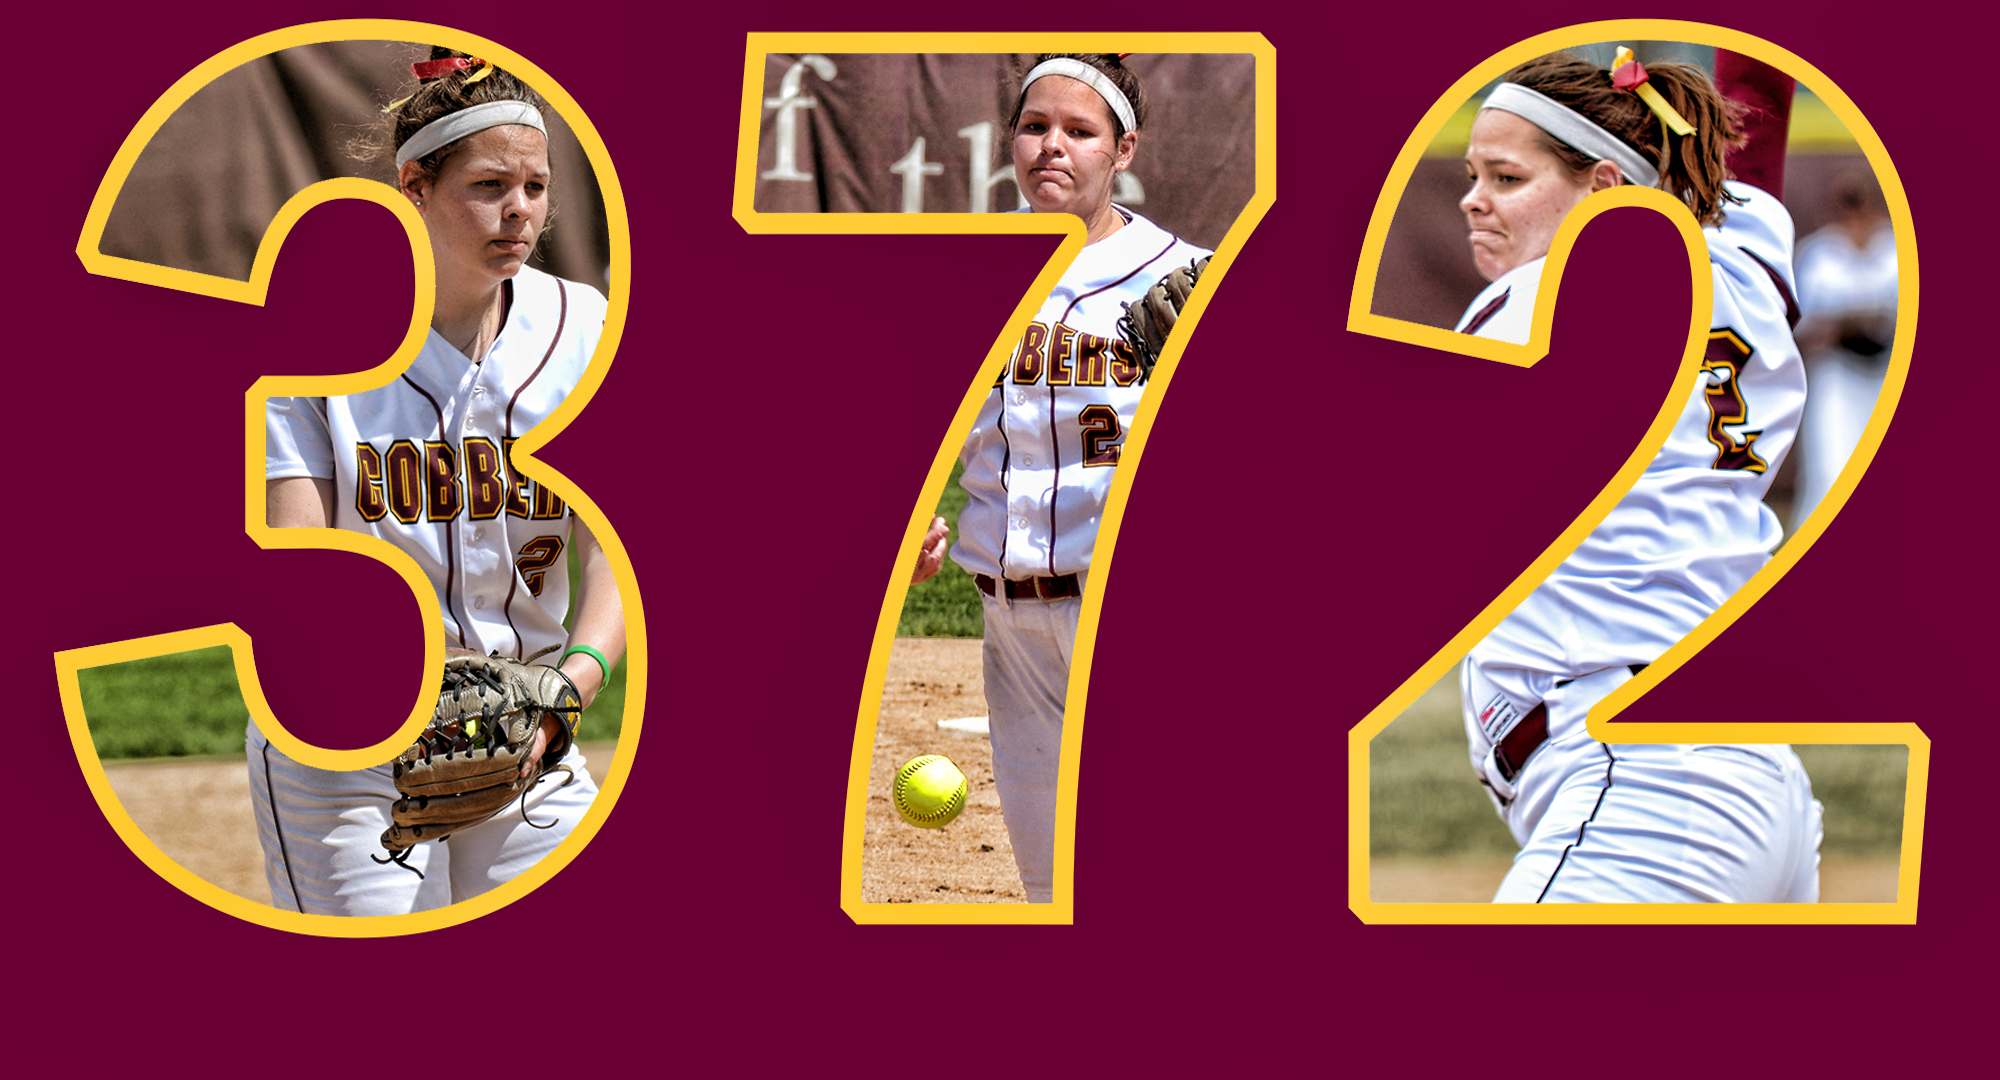 Abby Haraldson struck out her 372nd hitter to become the school's all-time strikeout leader.